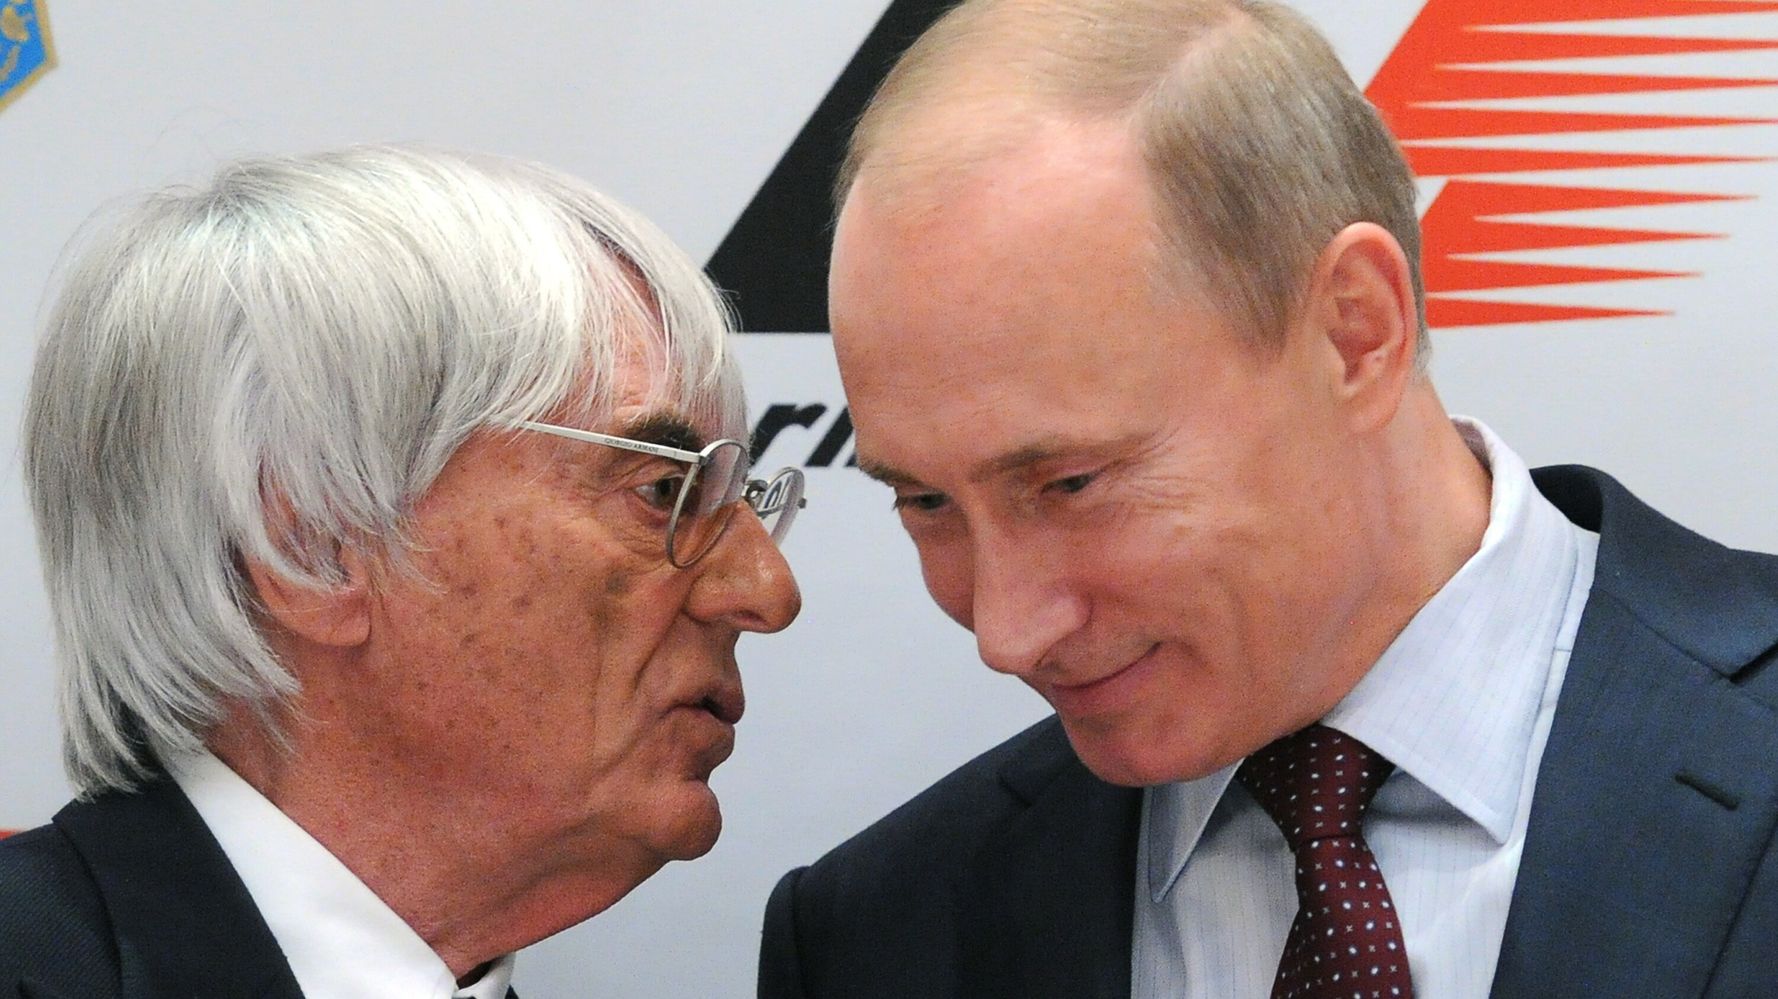 Bernie Ecclestone Says He’d ‘Take A Bullet’ For ‘First Class’ Putin All through Shocking GMB Interview